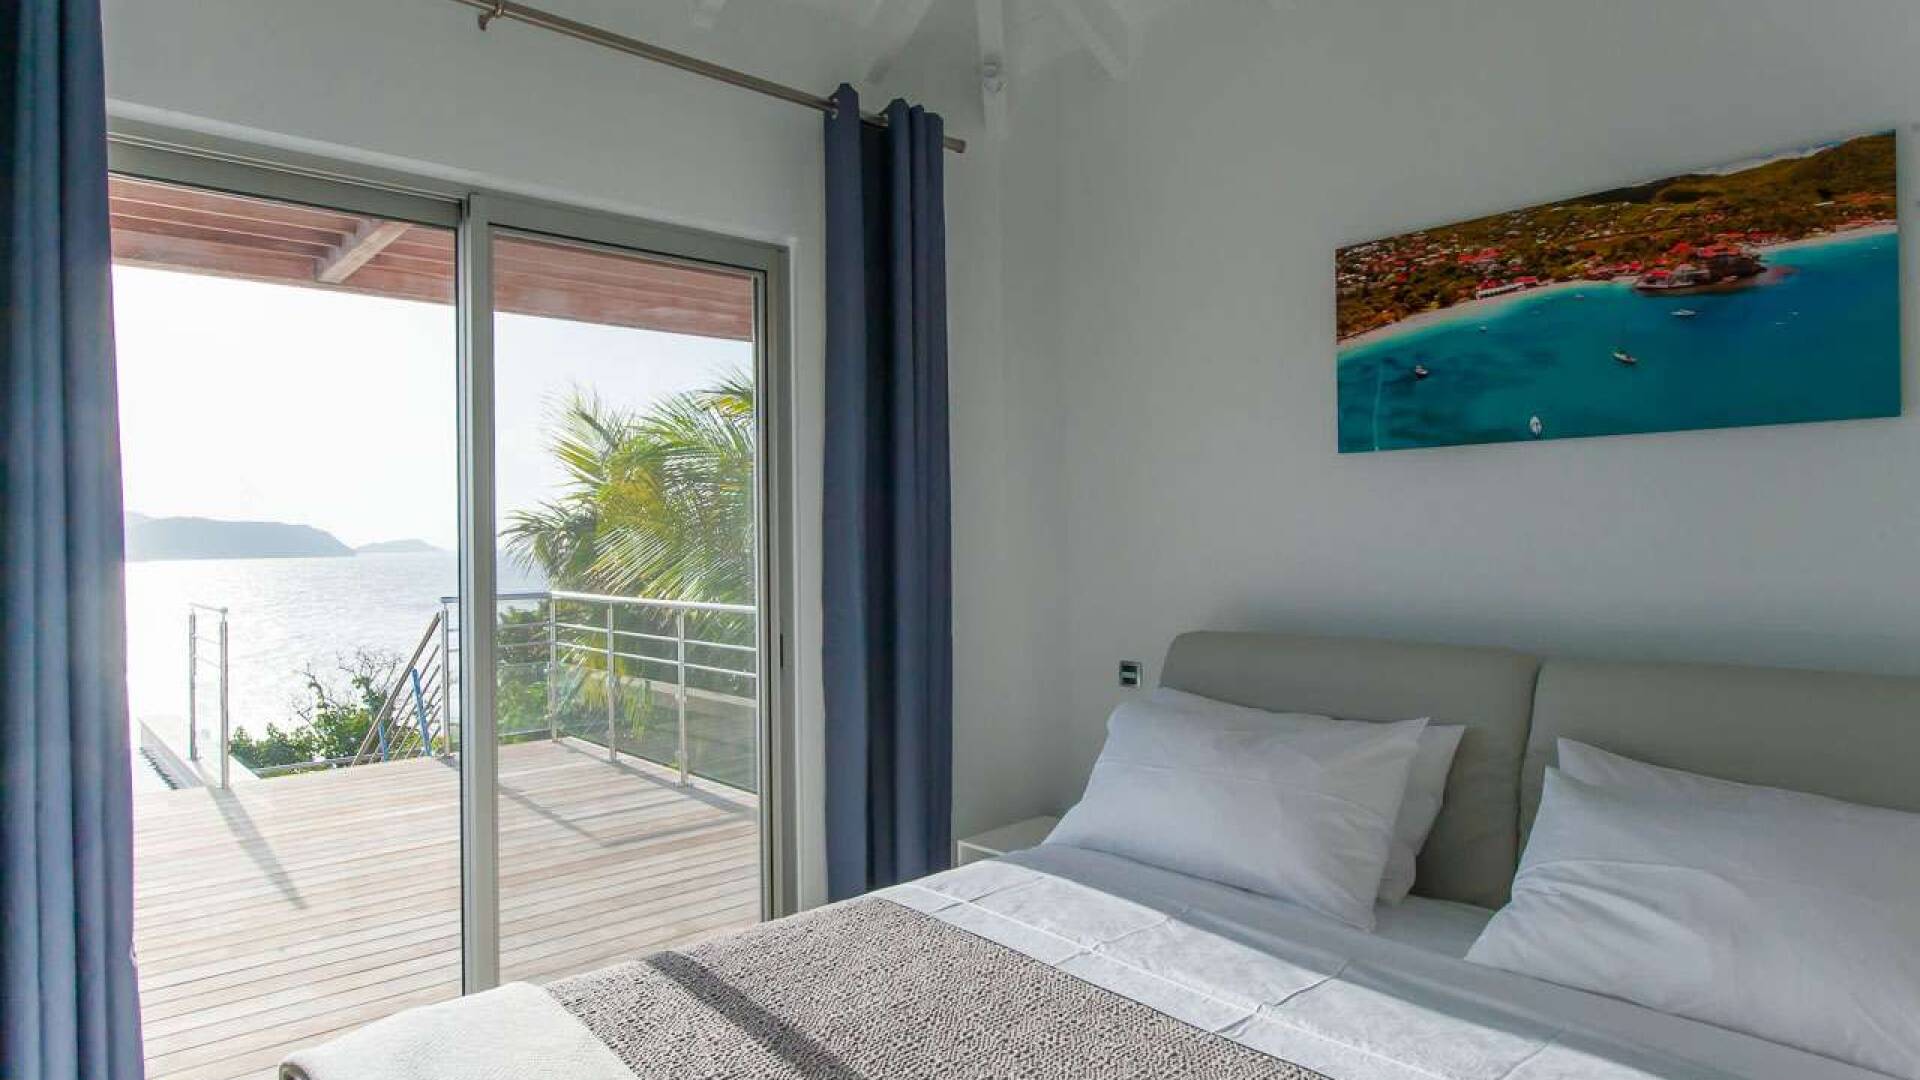 Bedroom at WV VPM, Pointe Milou, St. Barthelemy